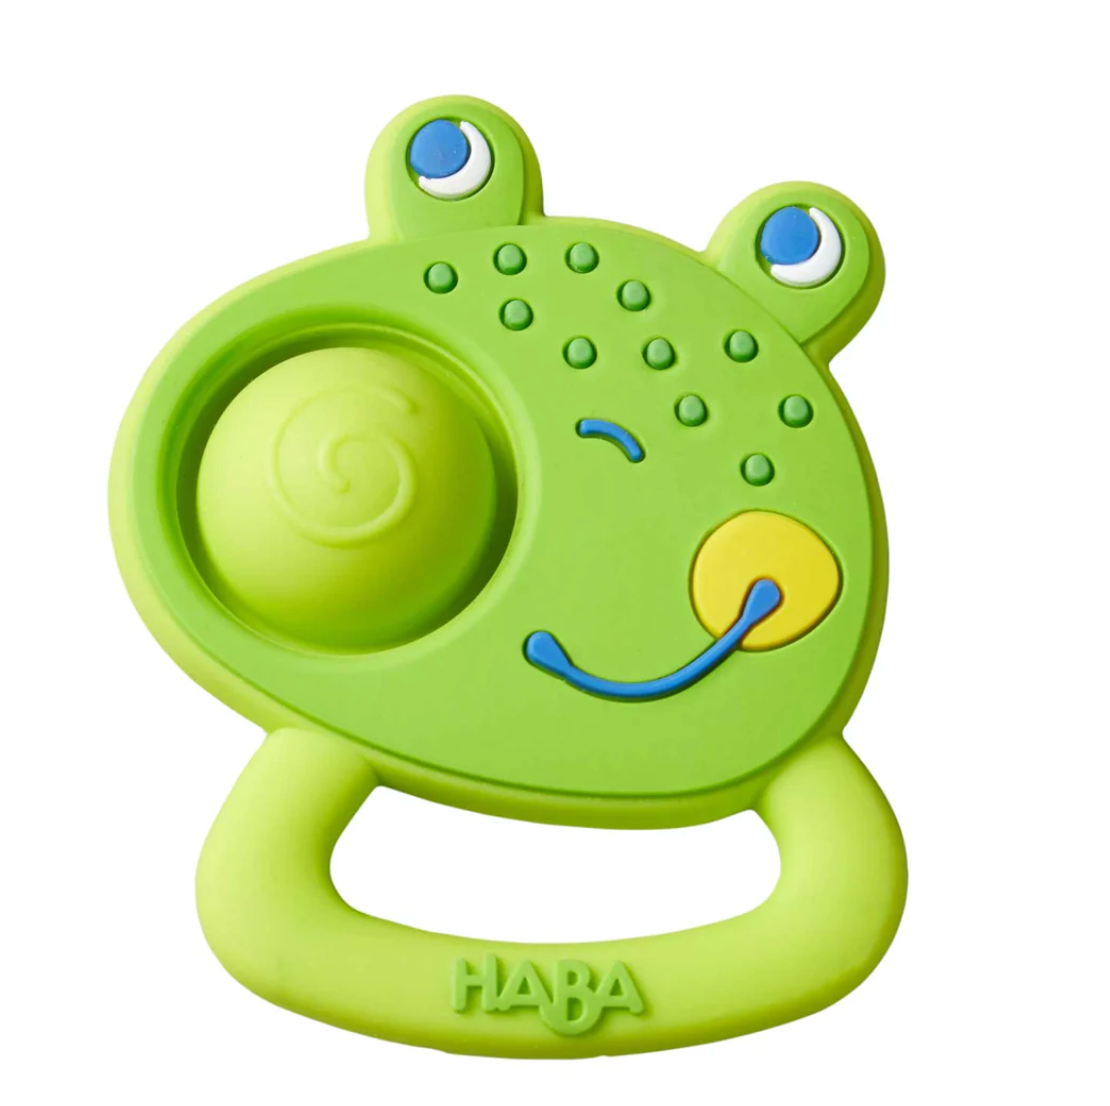 Frog Popping Clutching Toy